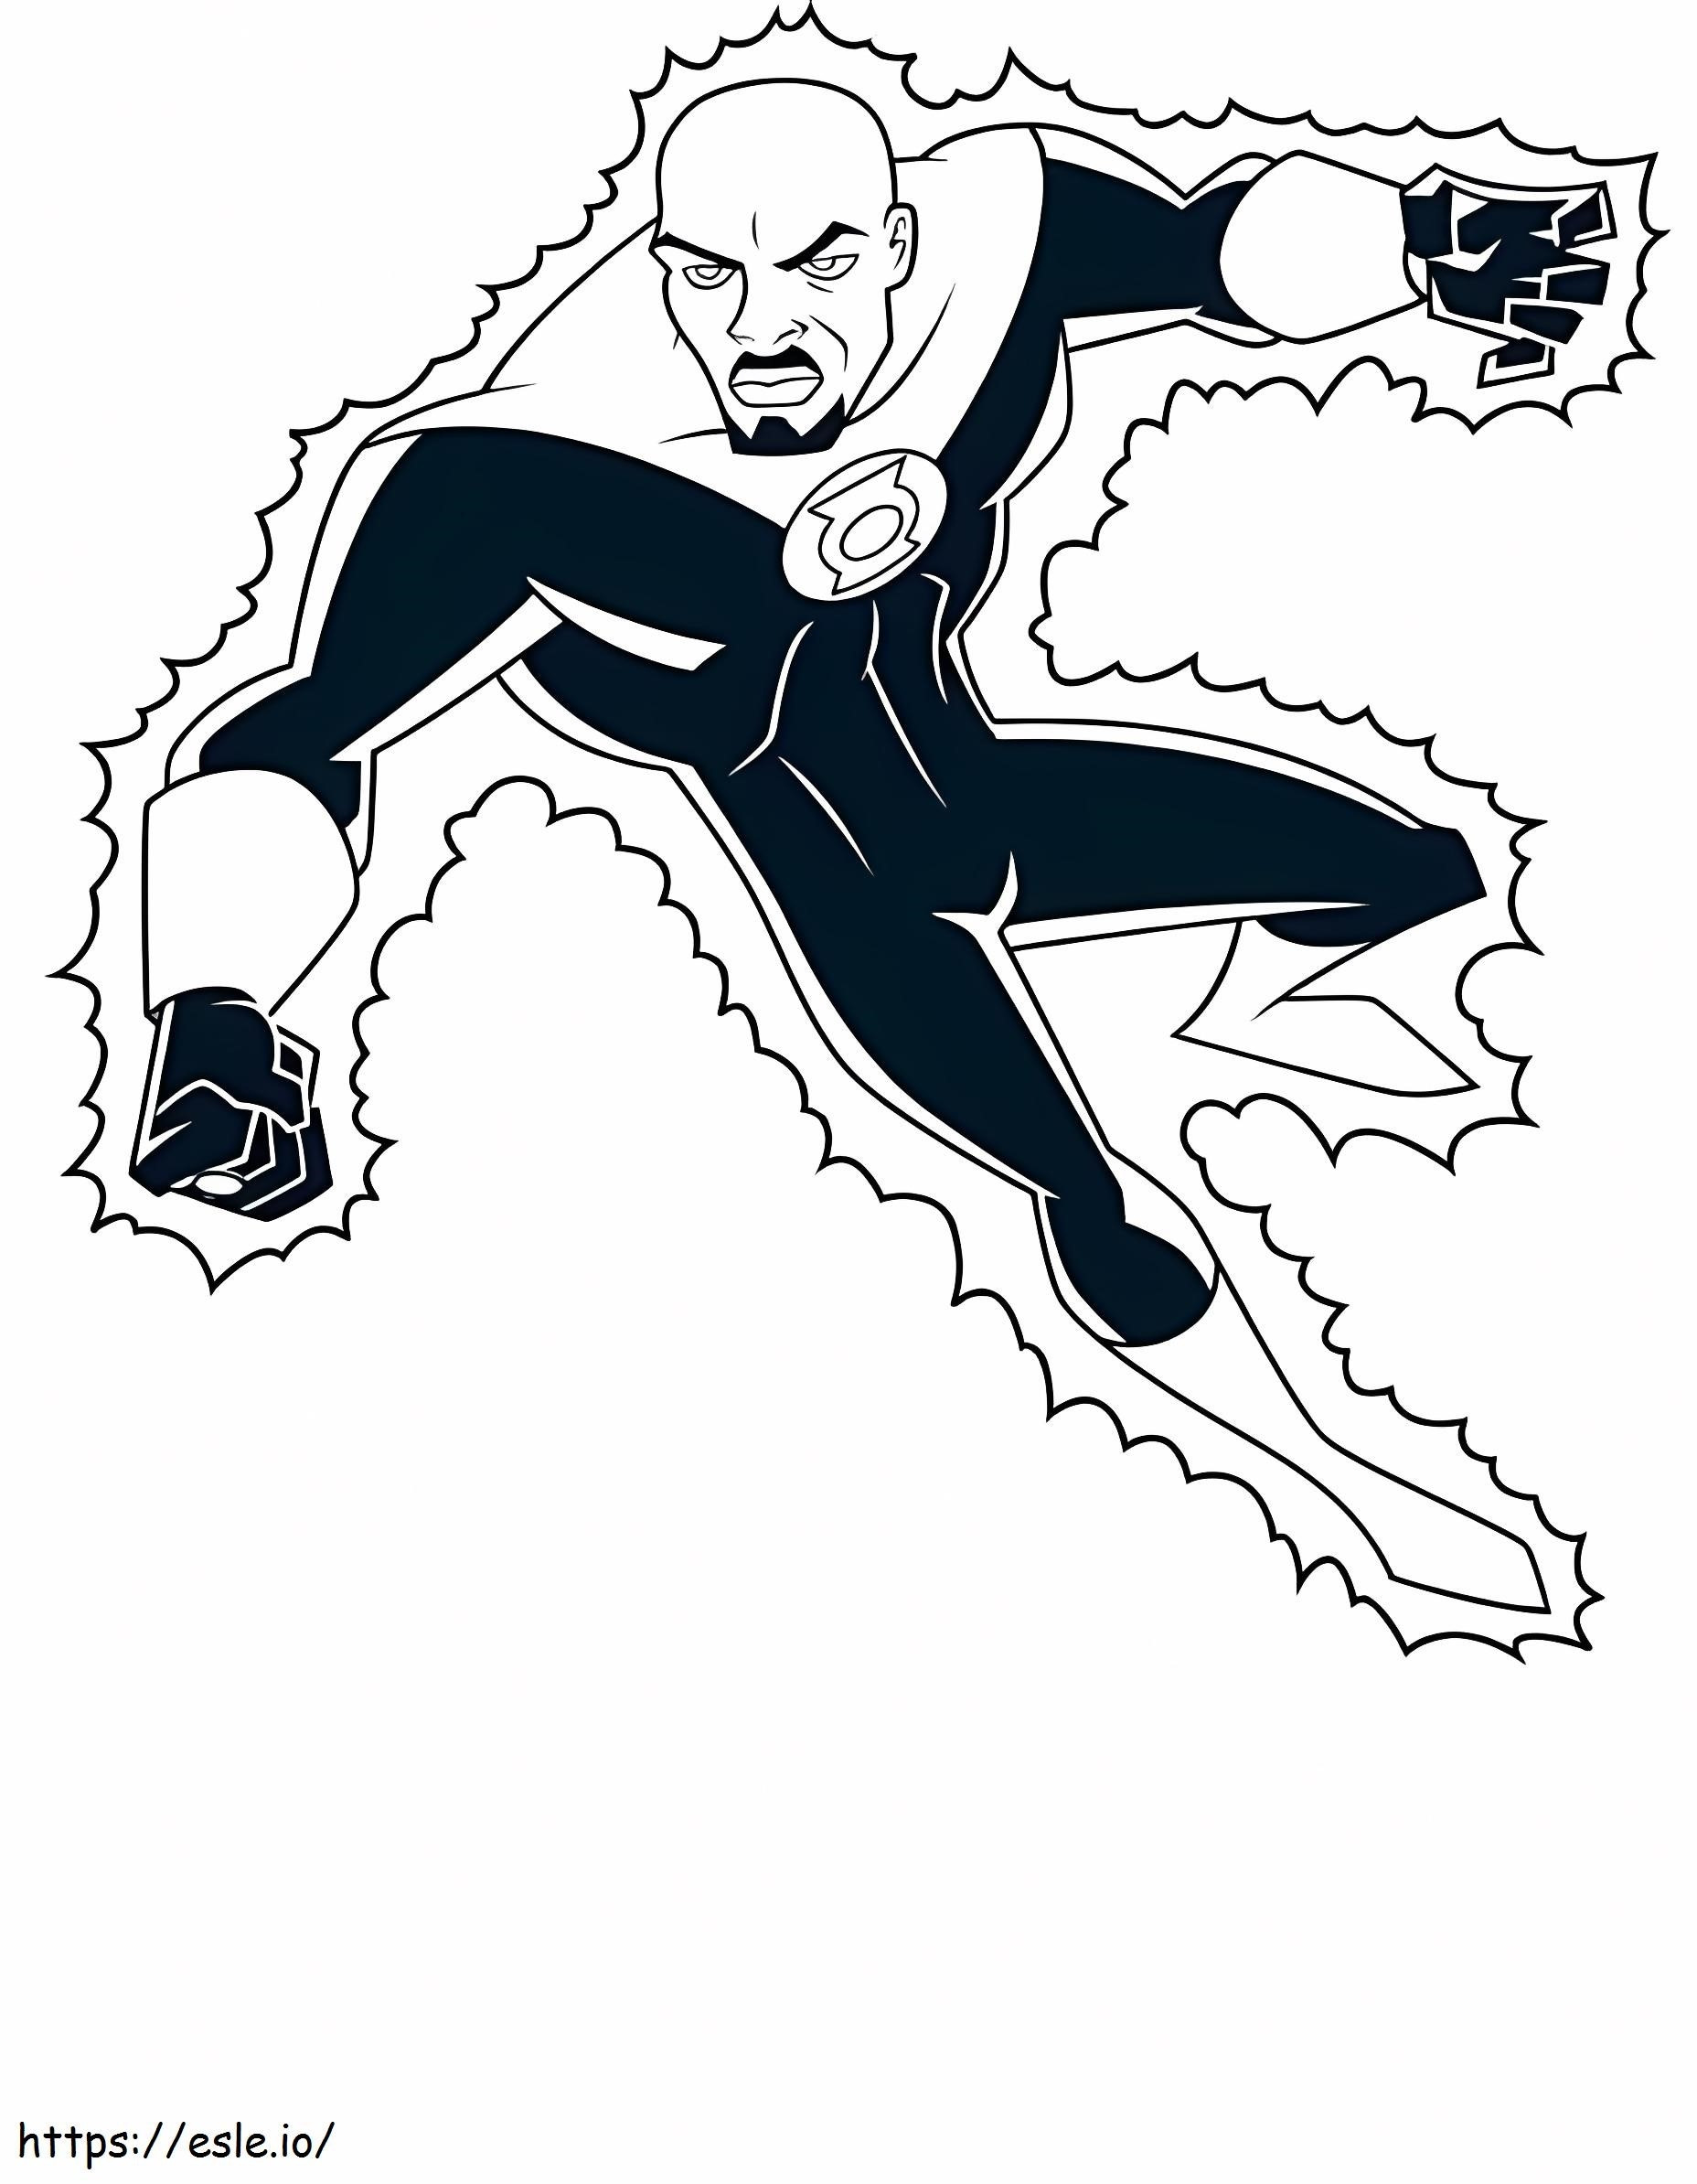 Green Lantern Justuce League coloring page